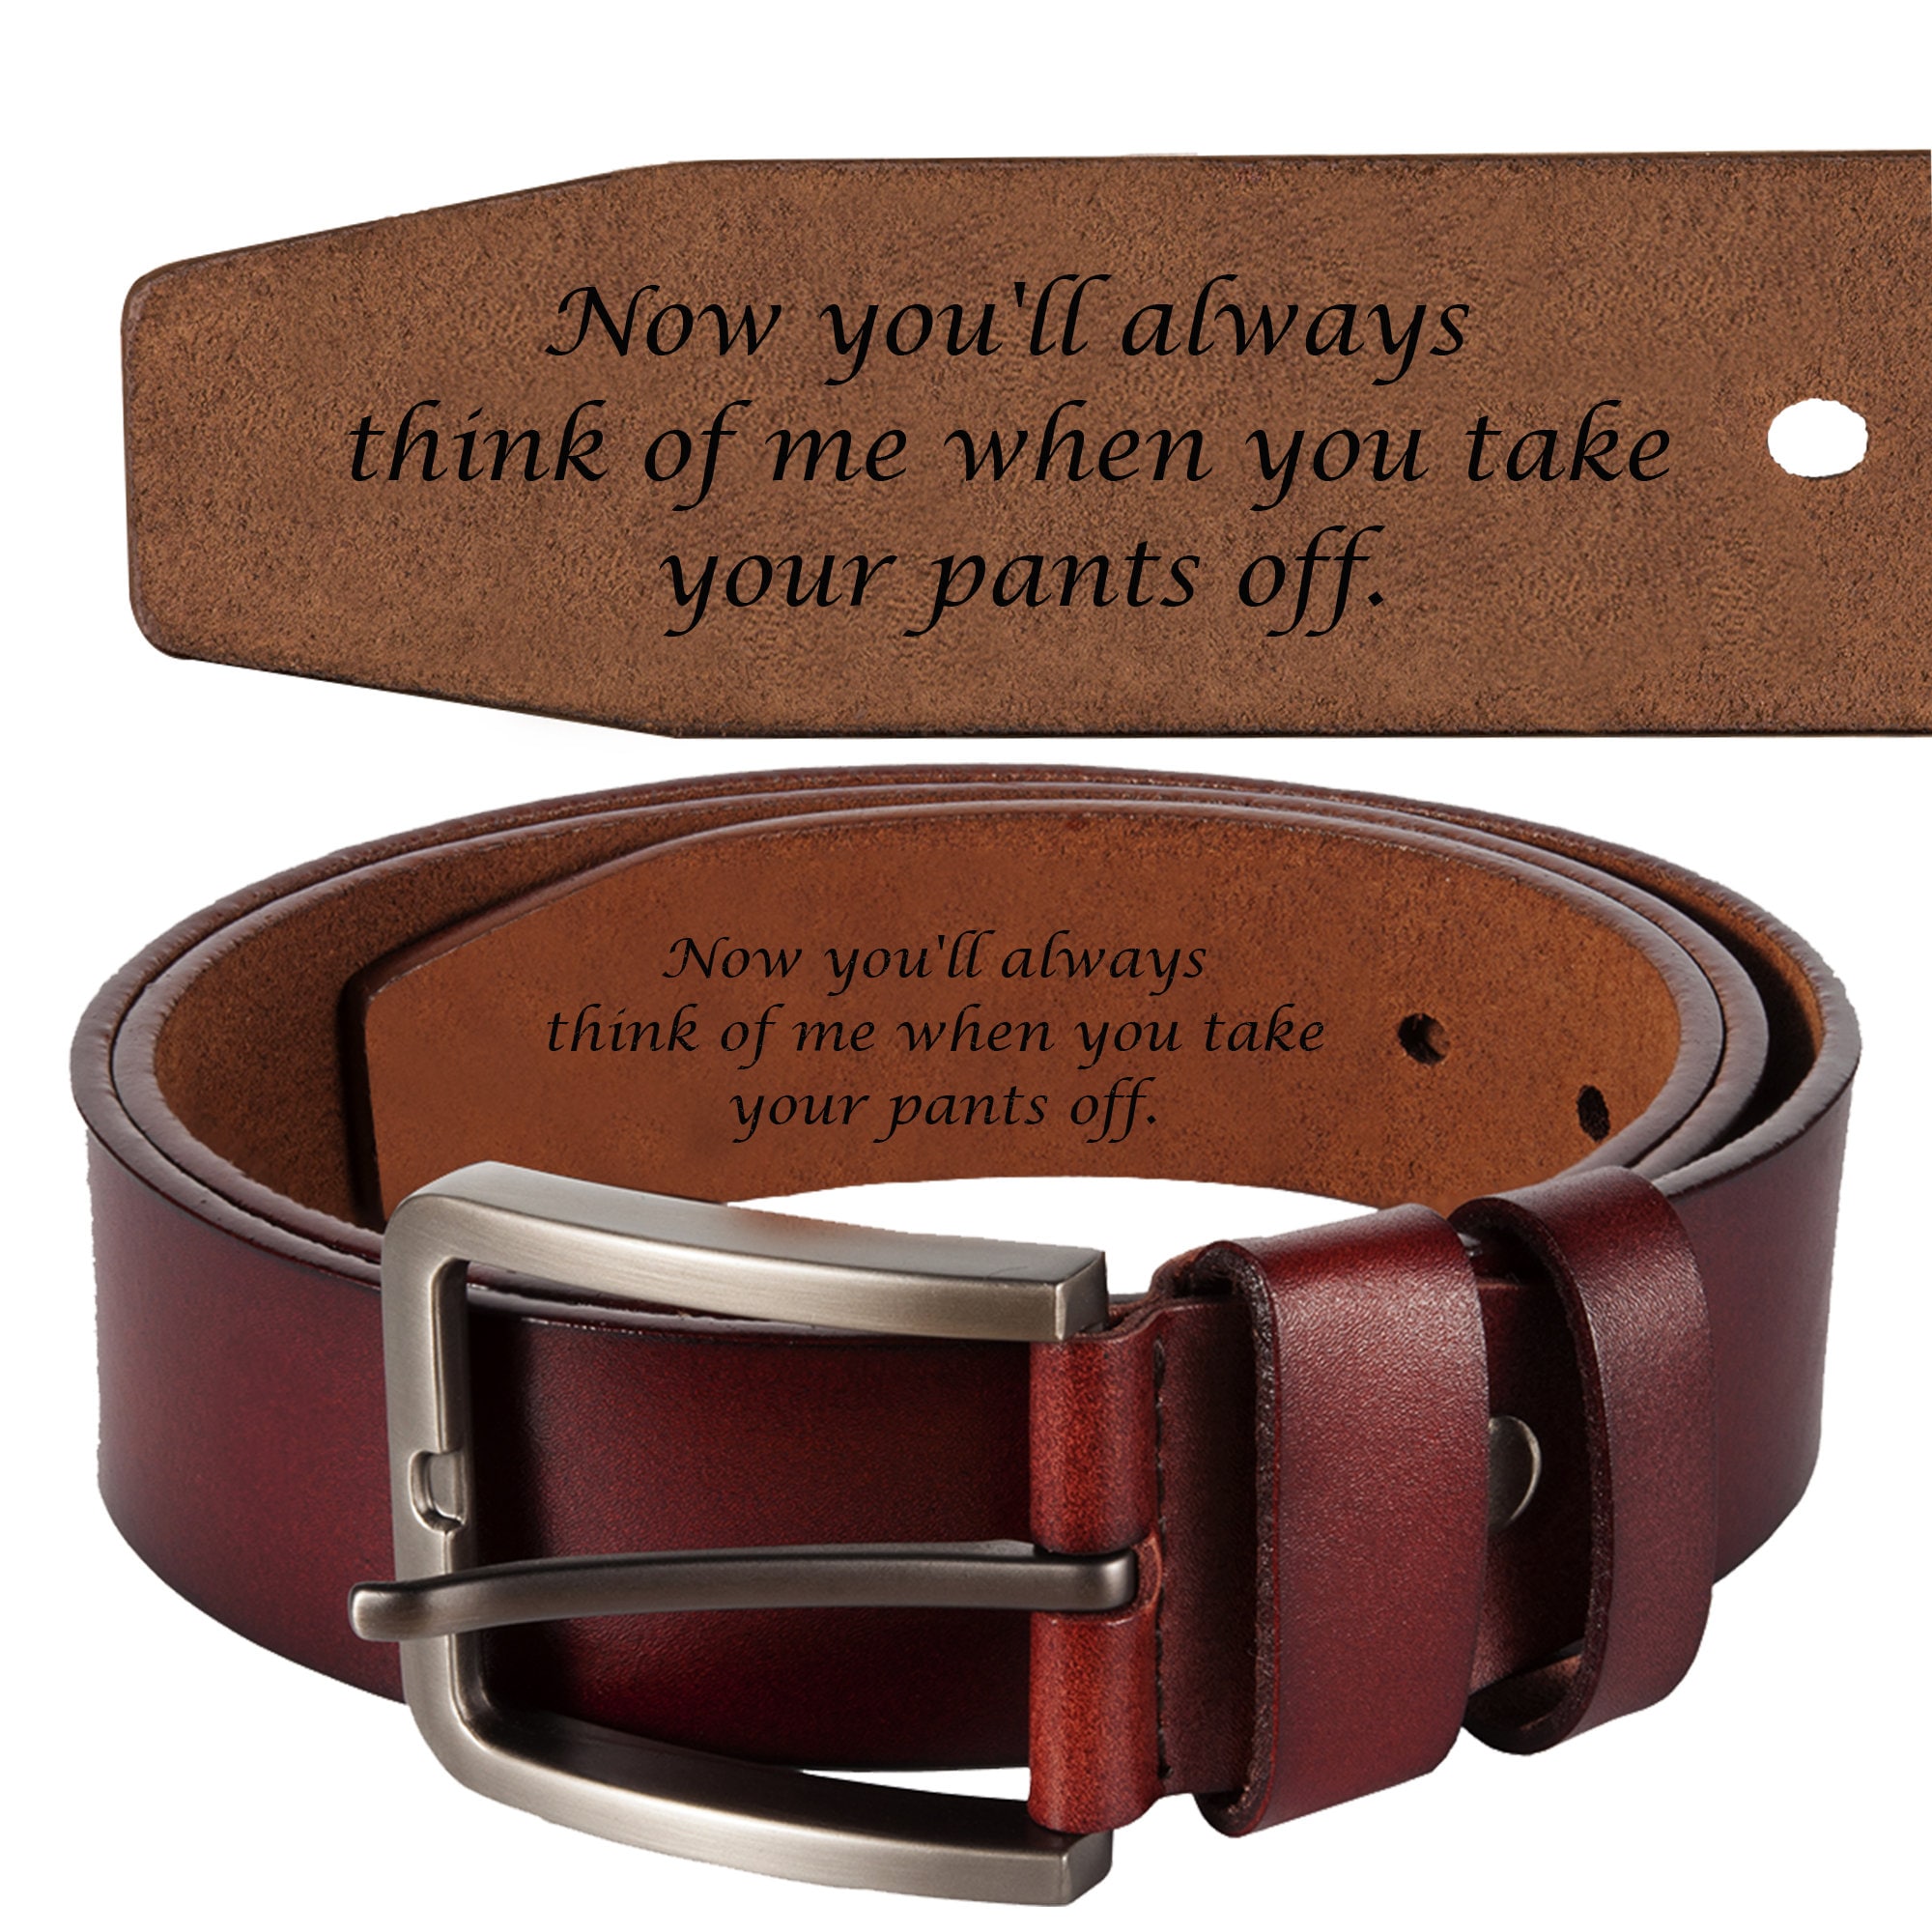 How to Measure Your Belt Size - Engraved Gift Idea